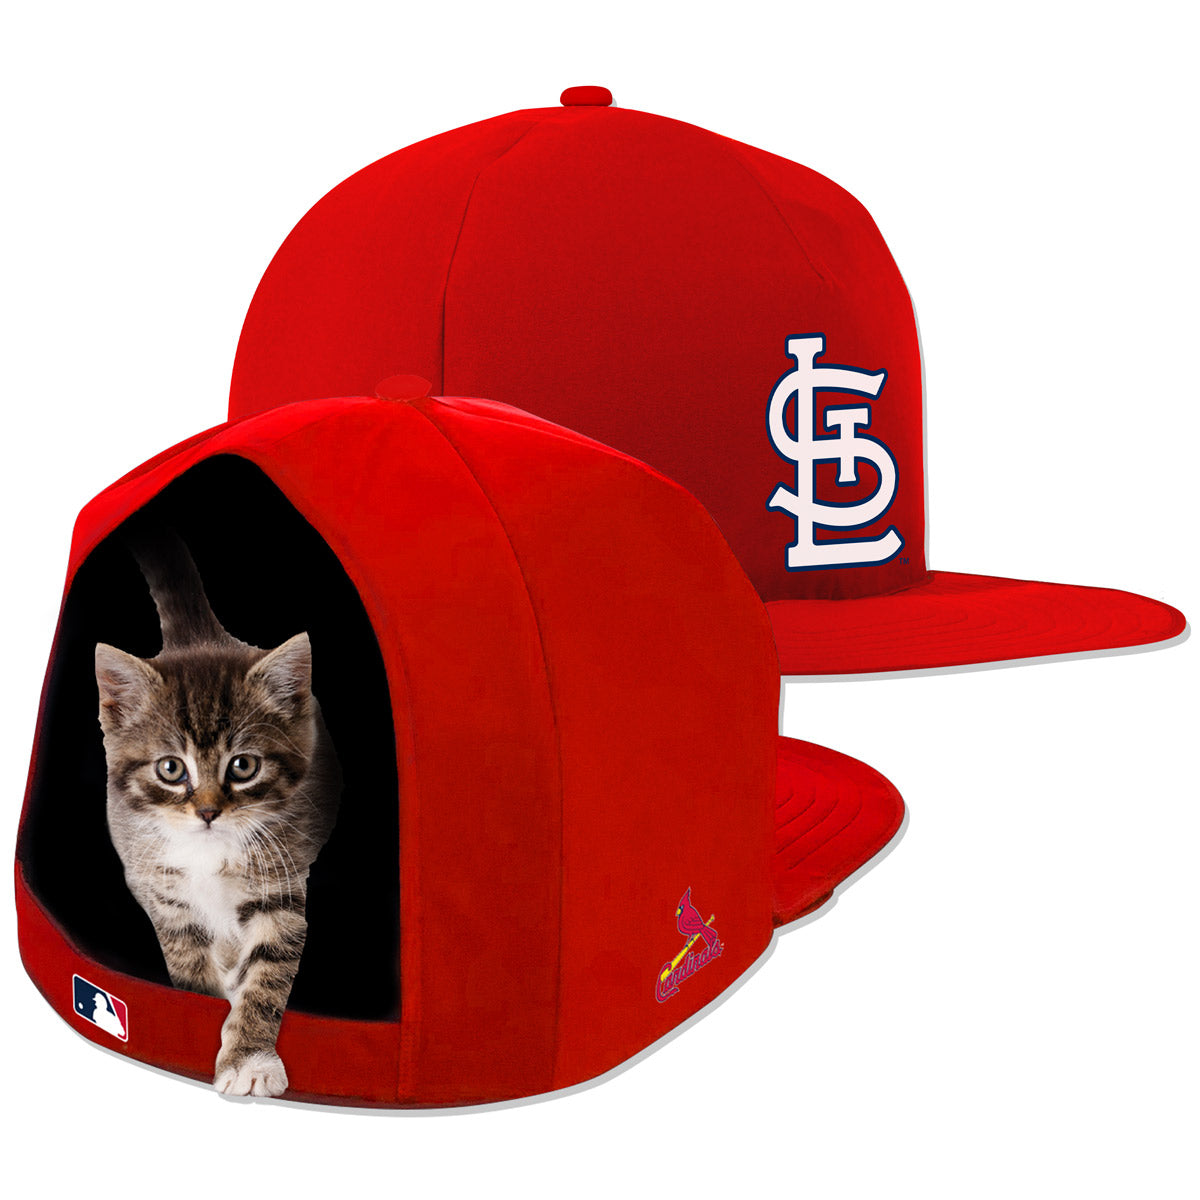 Nap Cap Officially Licensed Pet Products of NBA, MLB, NHL & College